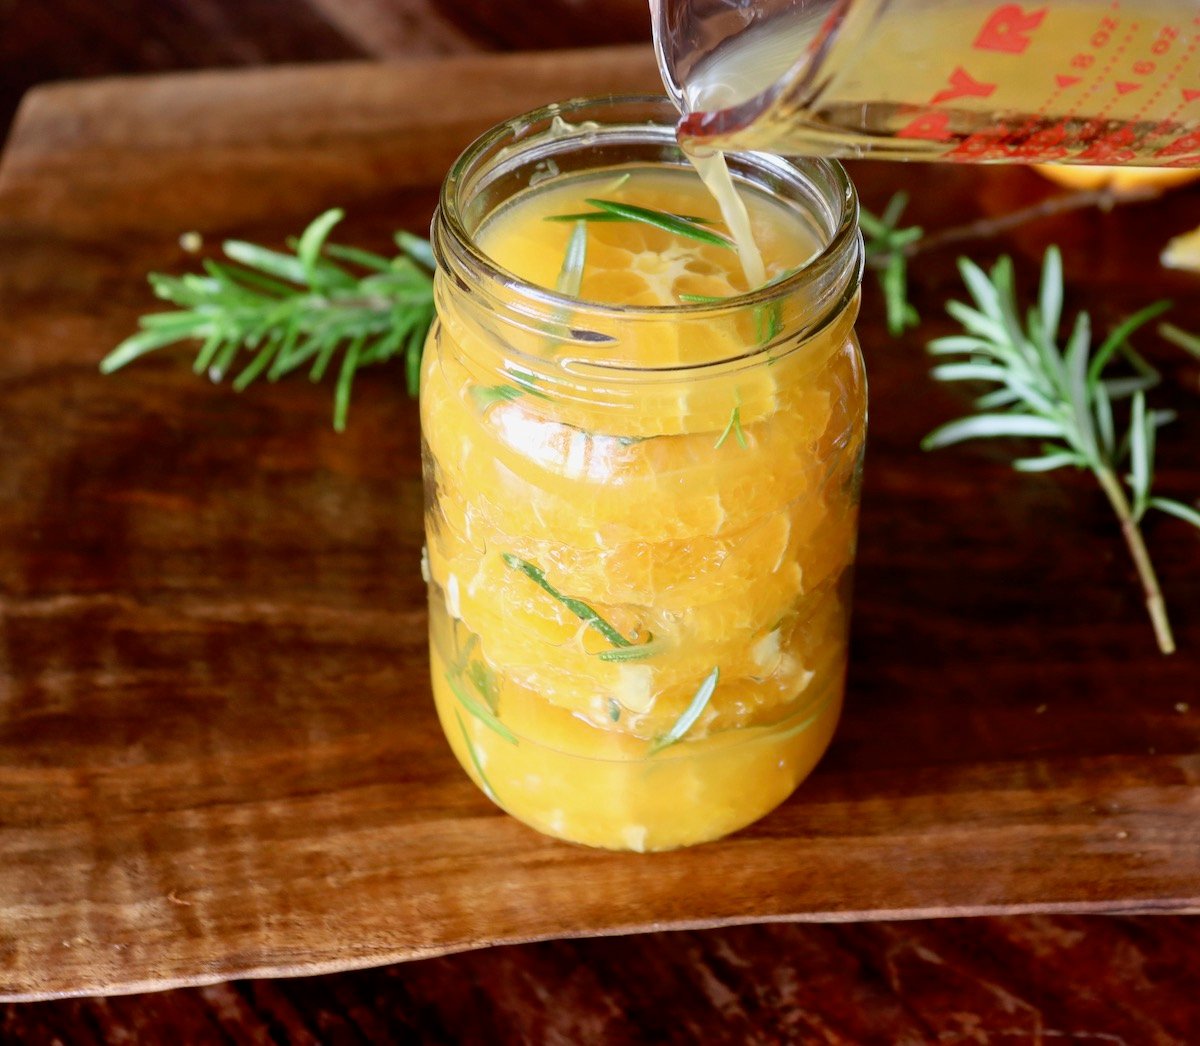 Jar with orange slices with orange juice being poured into it.